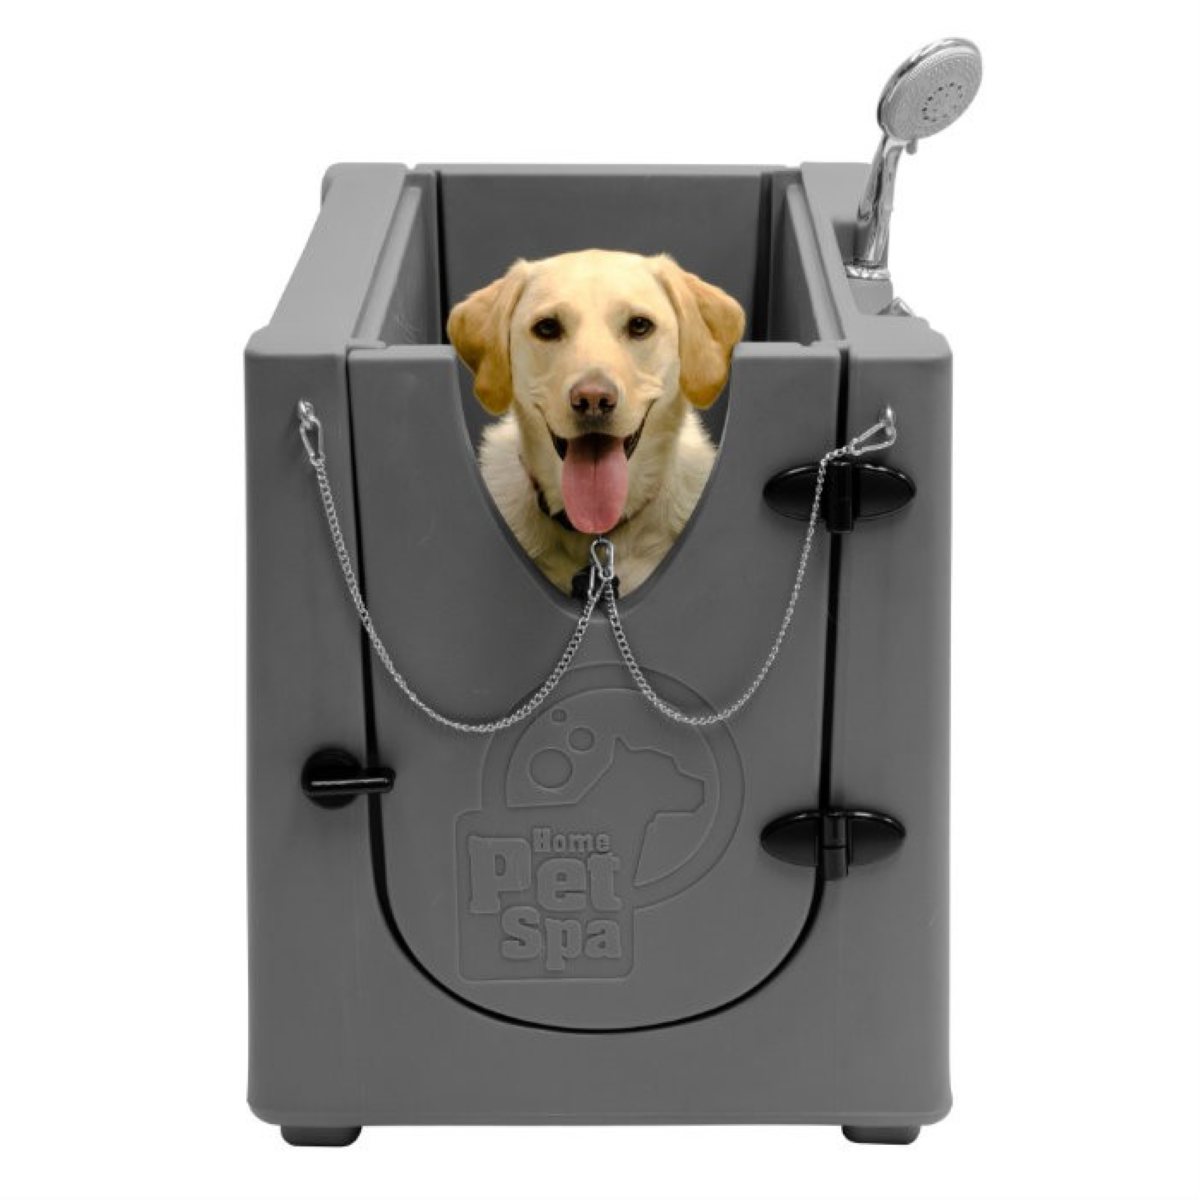 Home Pet Spa Portable Pet Spa Review - Great for dogs of all sizes!